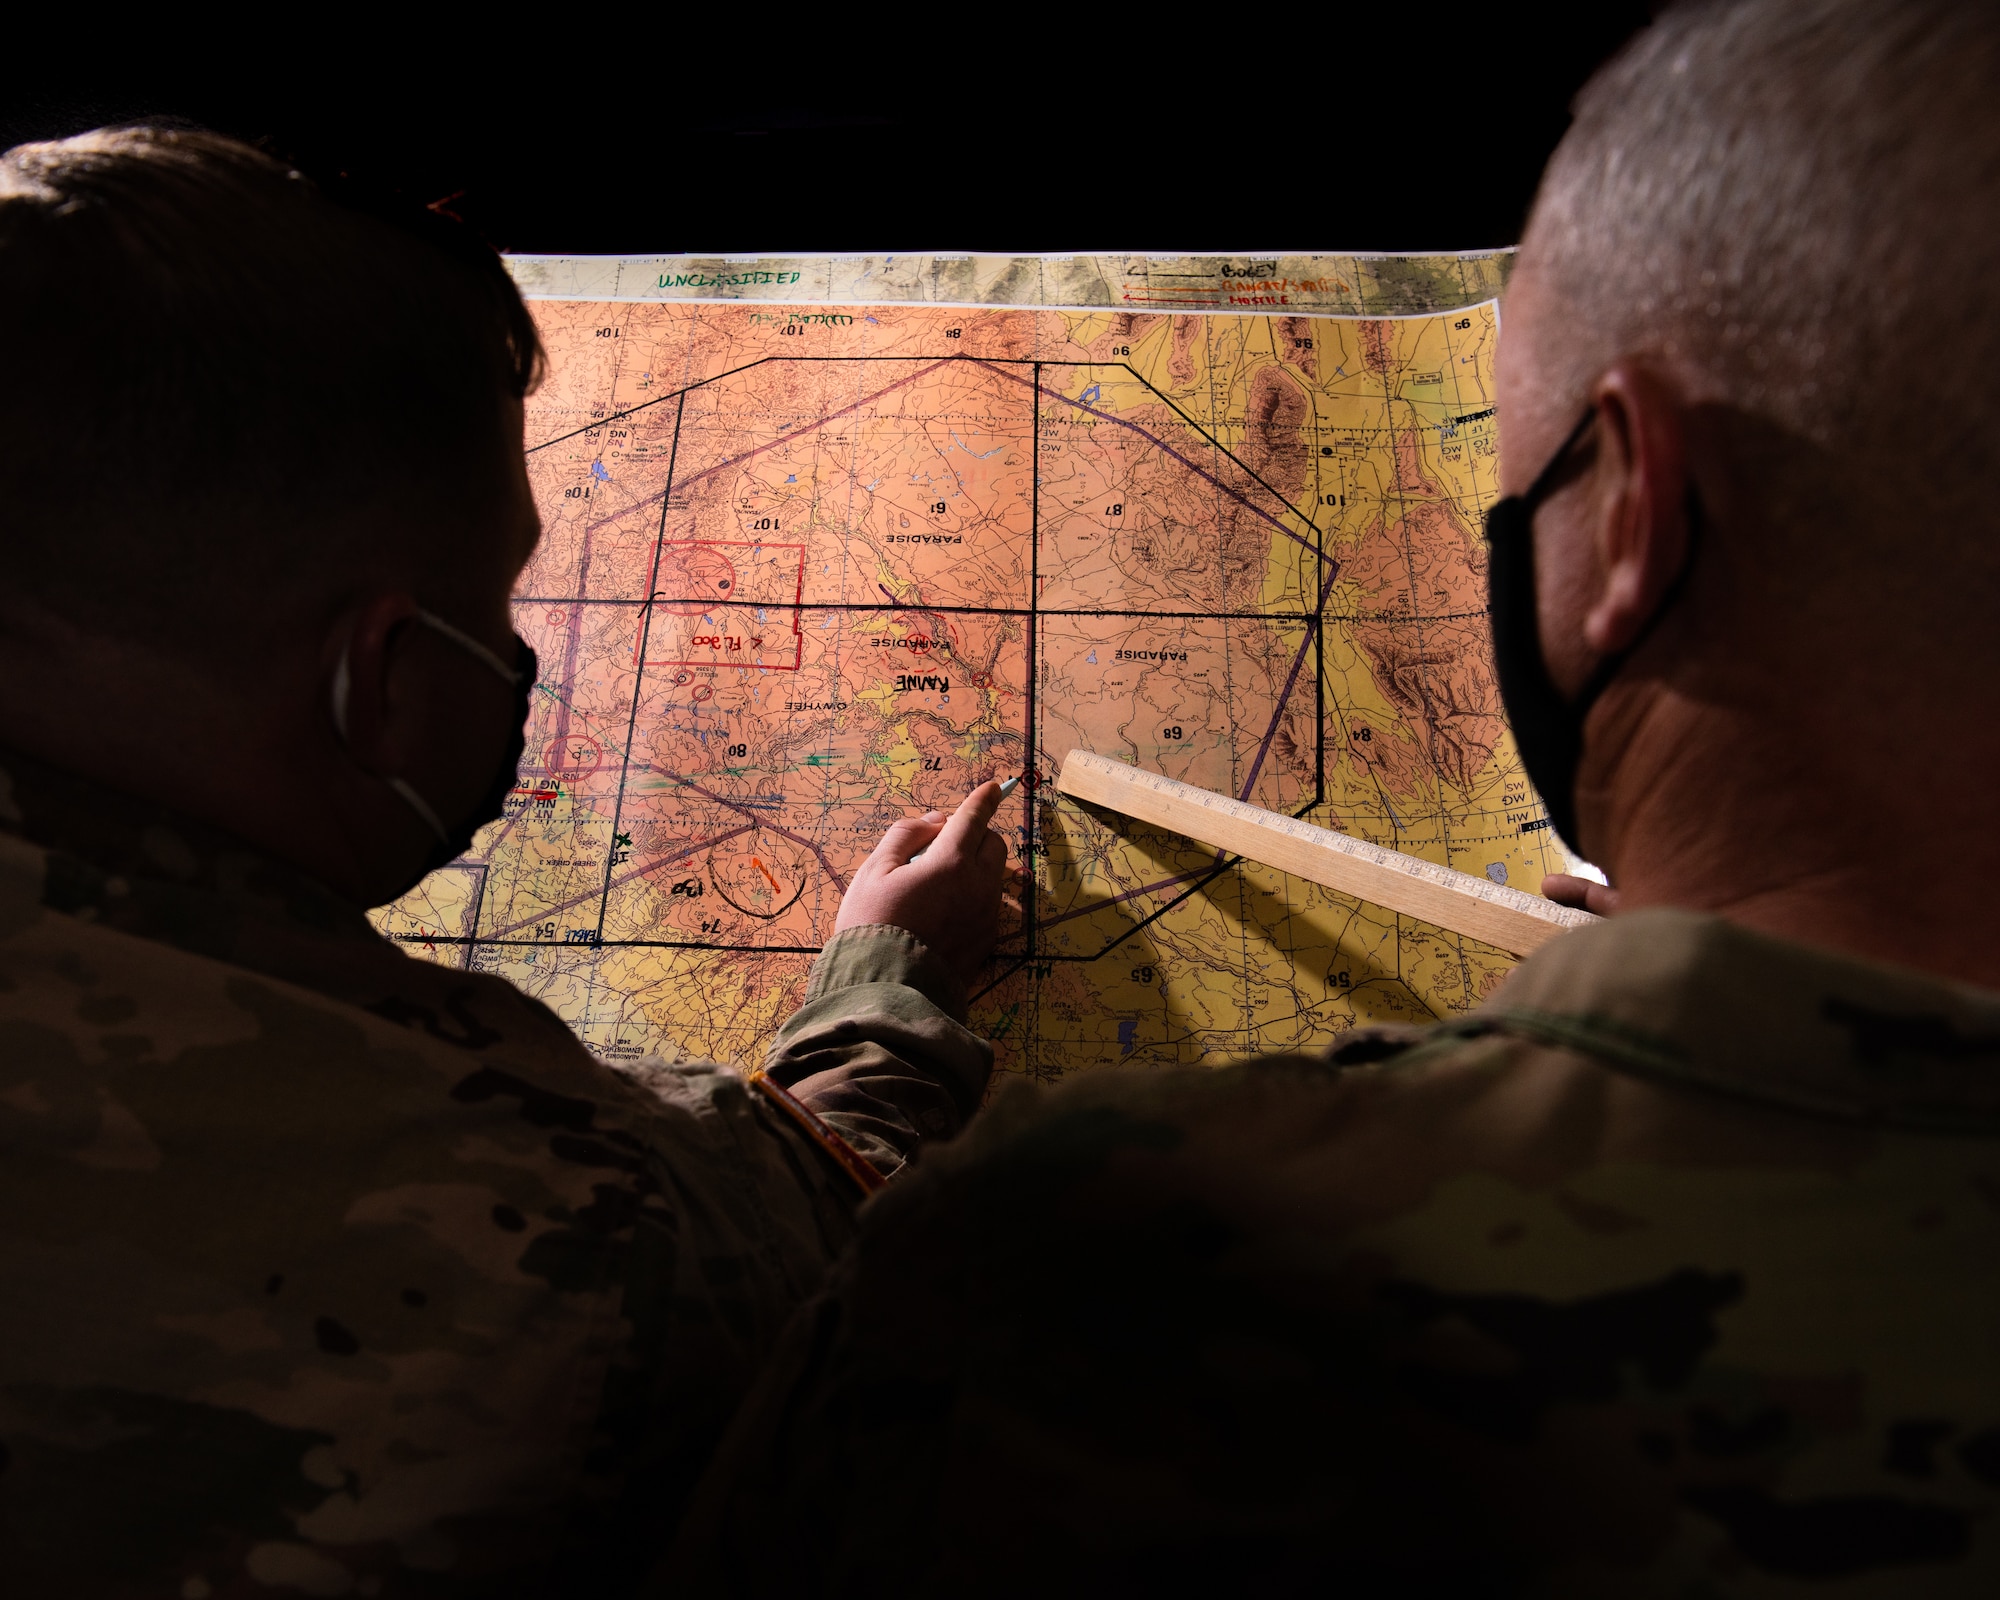 U.S. Air Force and U.S. Army service members mission plan at Mountain Home Air Force Base, Idaho, October 14, 2020. The 726th Air Control Squadron and the 31st Air Defense Artillery Defense Brigade have integrated their radar, communication networks and defense systems to increase readiness and joint operation efficiency for when they deploy together in the future. (U.S. Air Force photo by Senior Airman Andrew Kobialka)